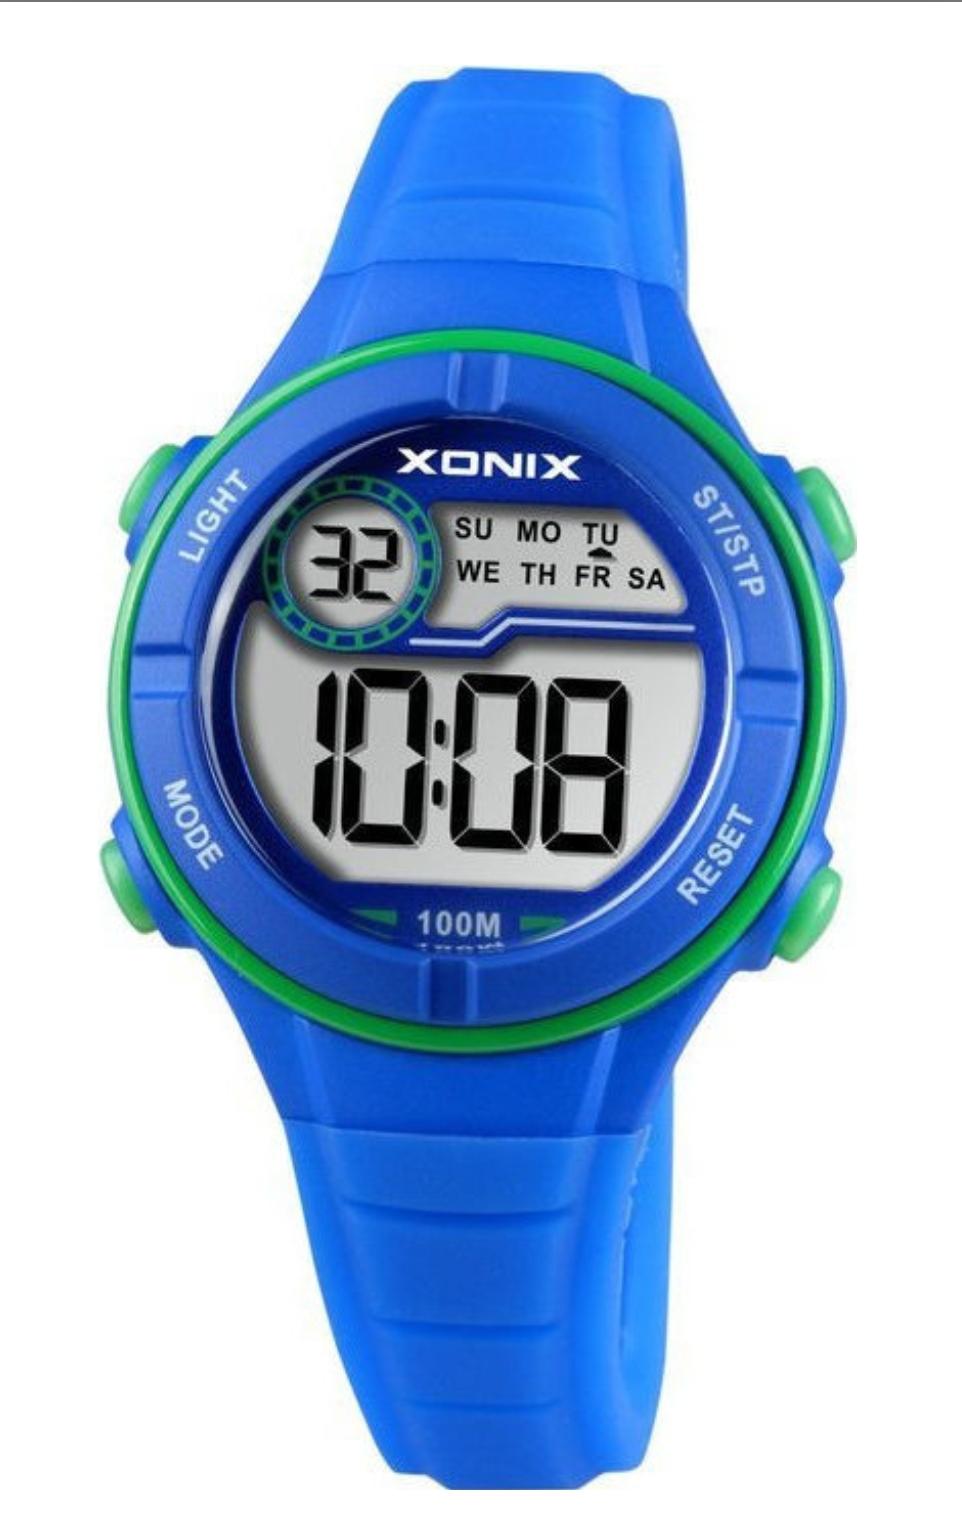 HONIX Childrens Watch with timer and blue rubber strap. BAI-004.